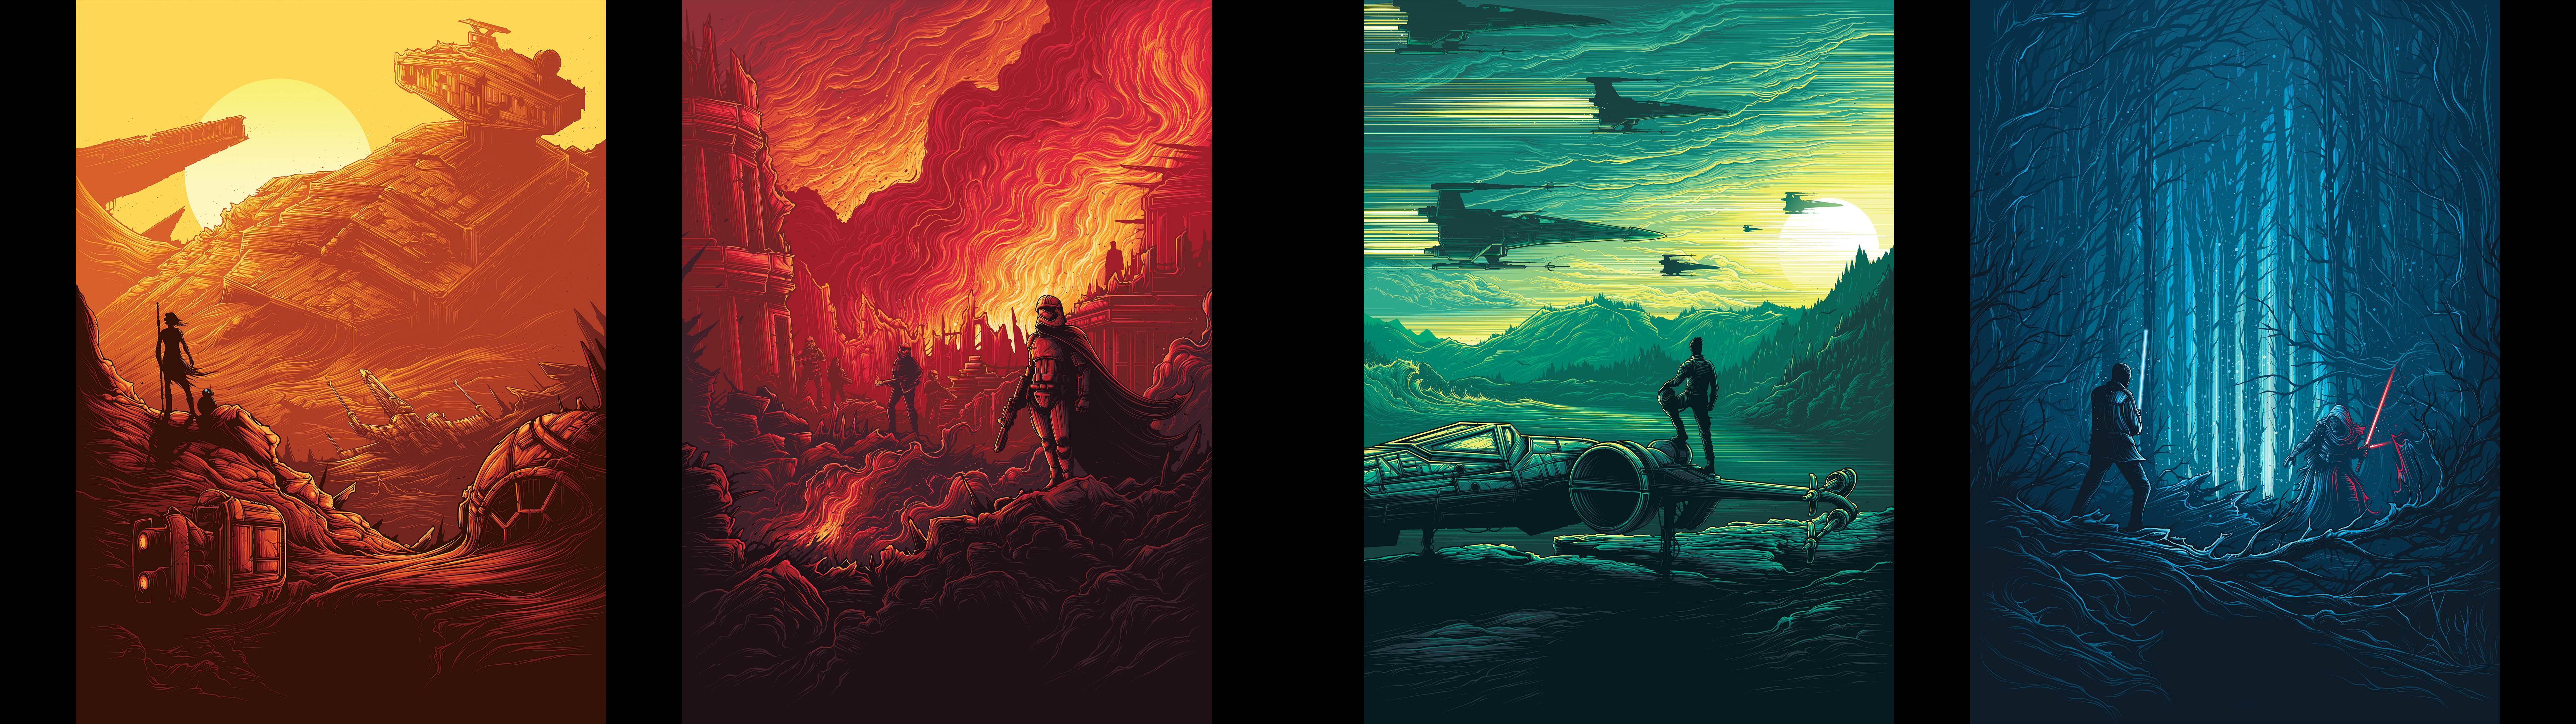 Wallpaper I made of those epic Imax Star Wars posters